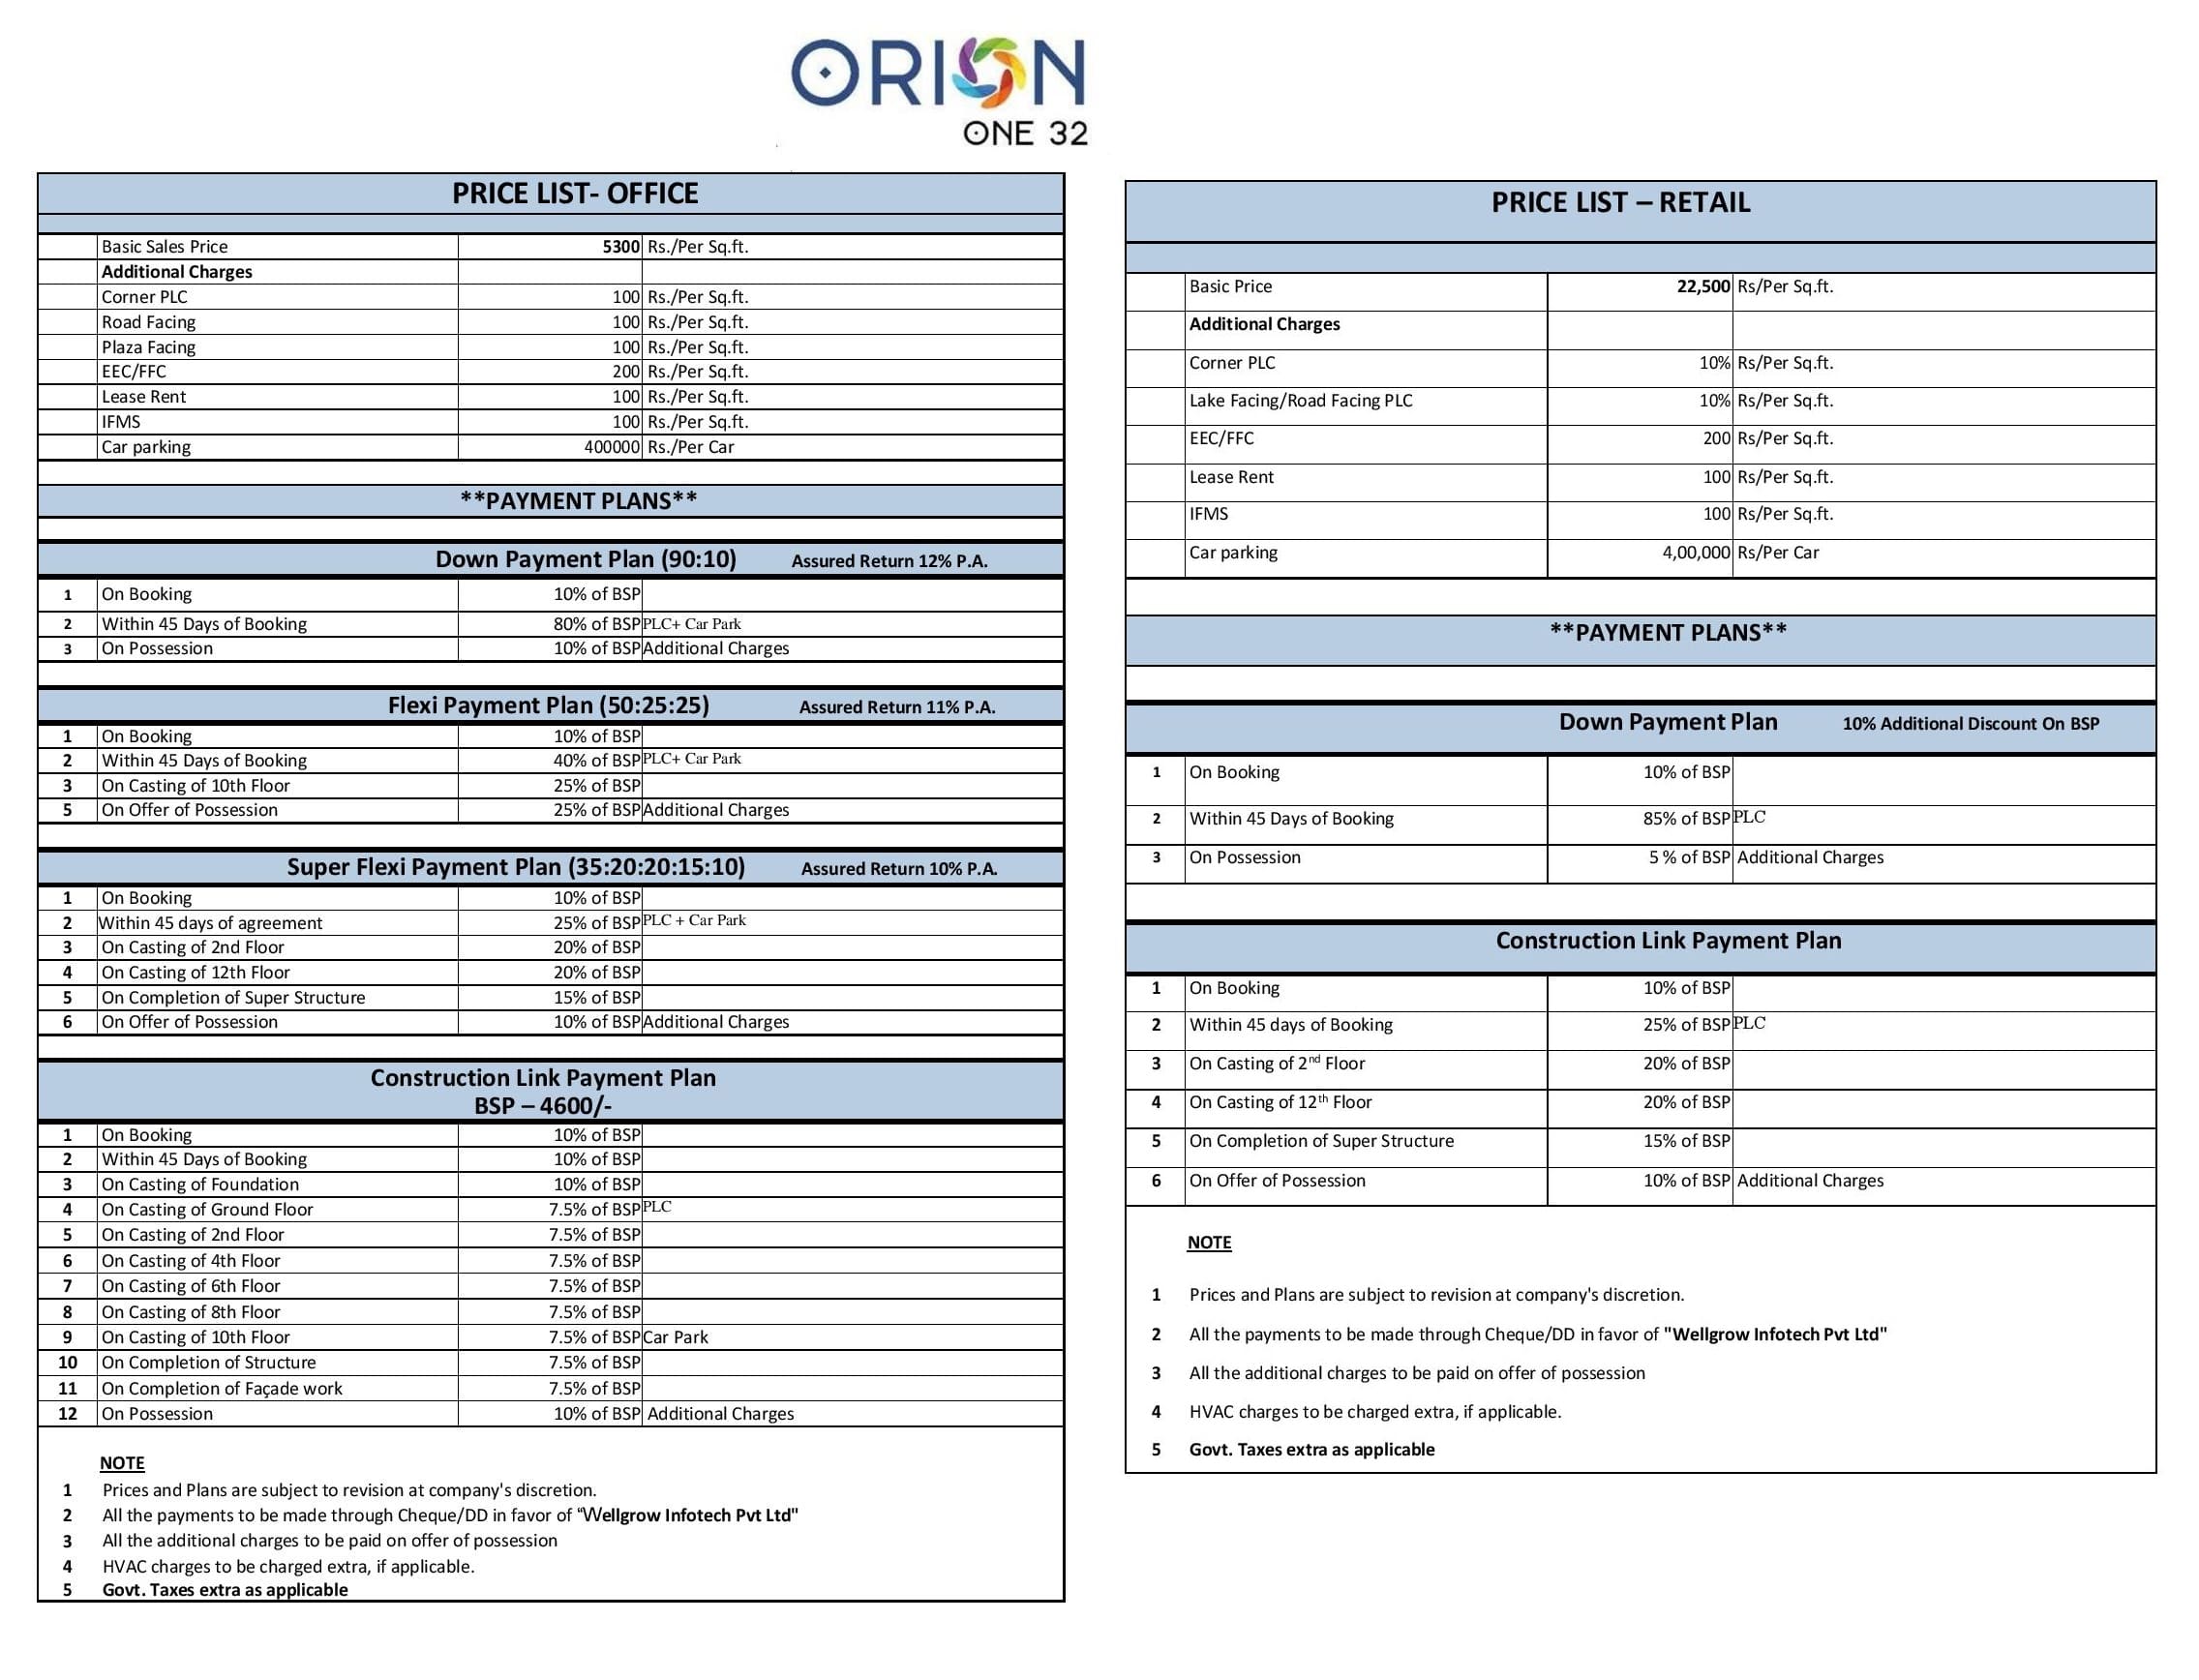 Orion One 32 Price List